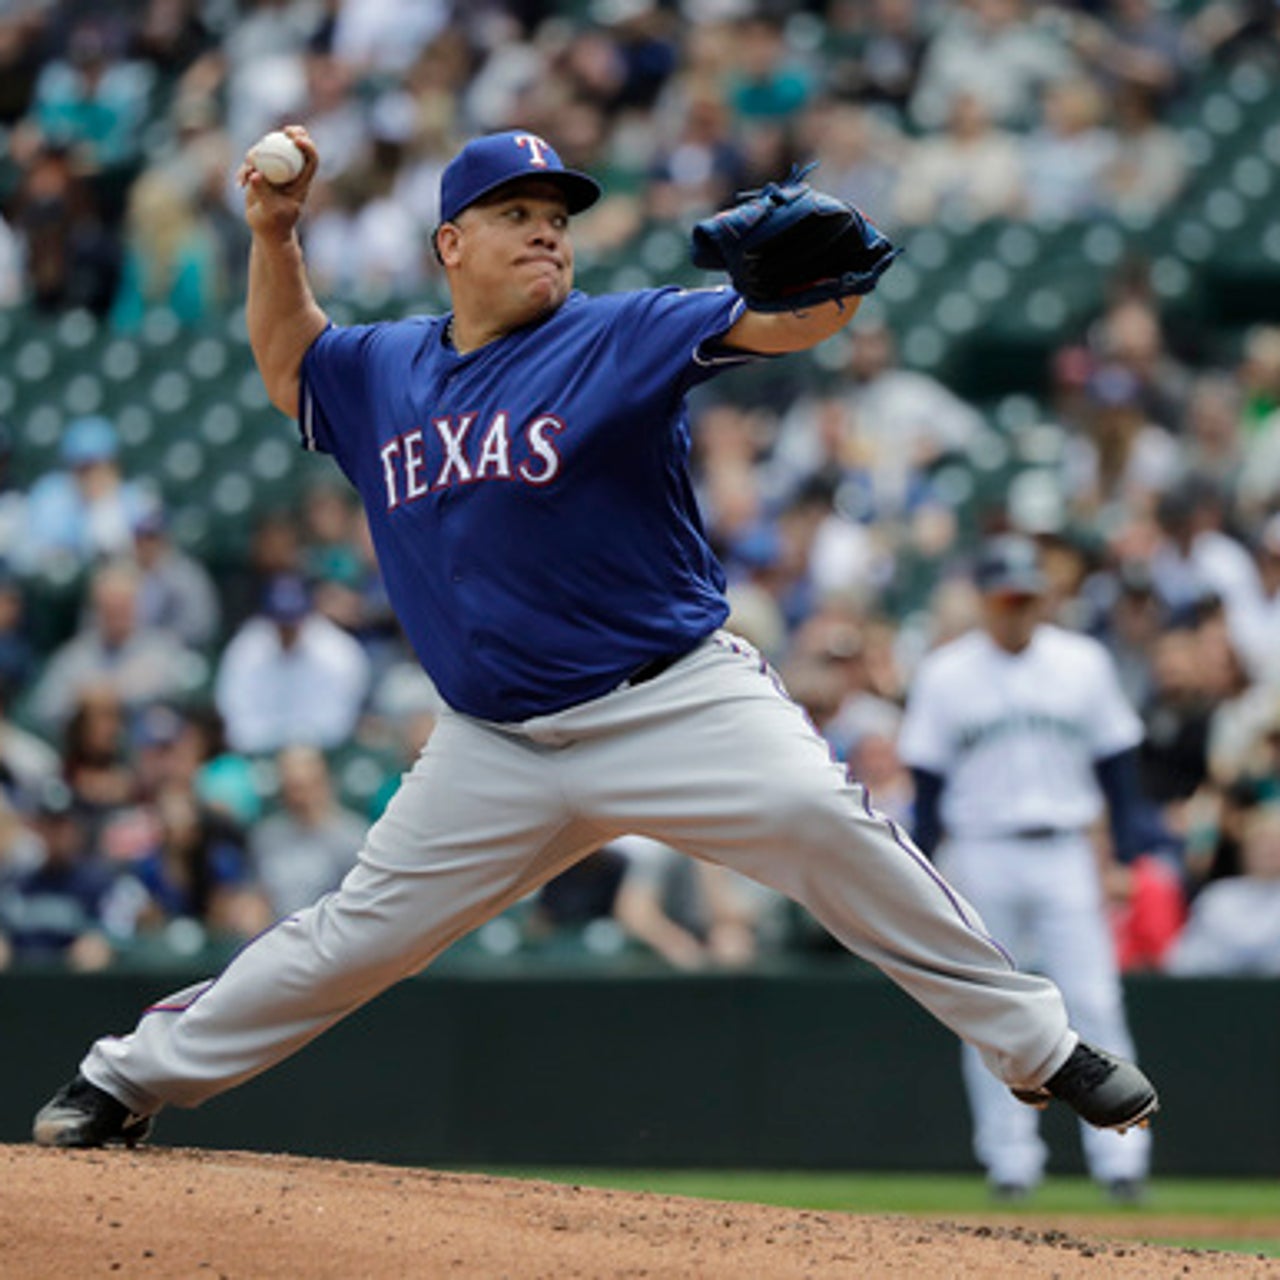 Oldest in majors, Rangers pitcher Bartolo Colon turns 45